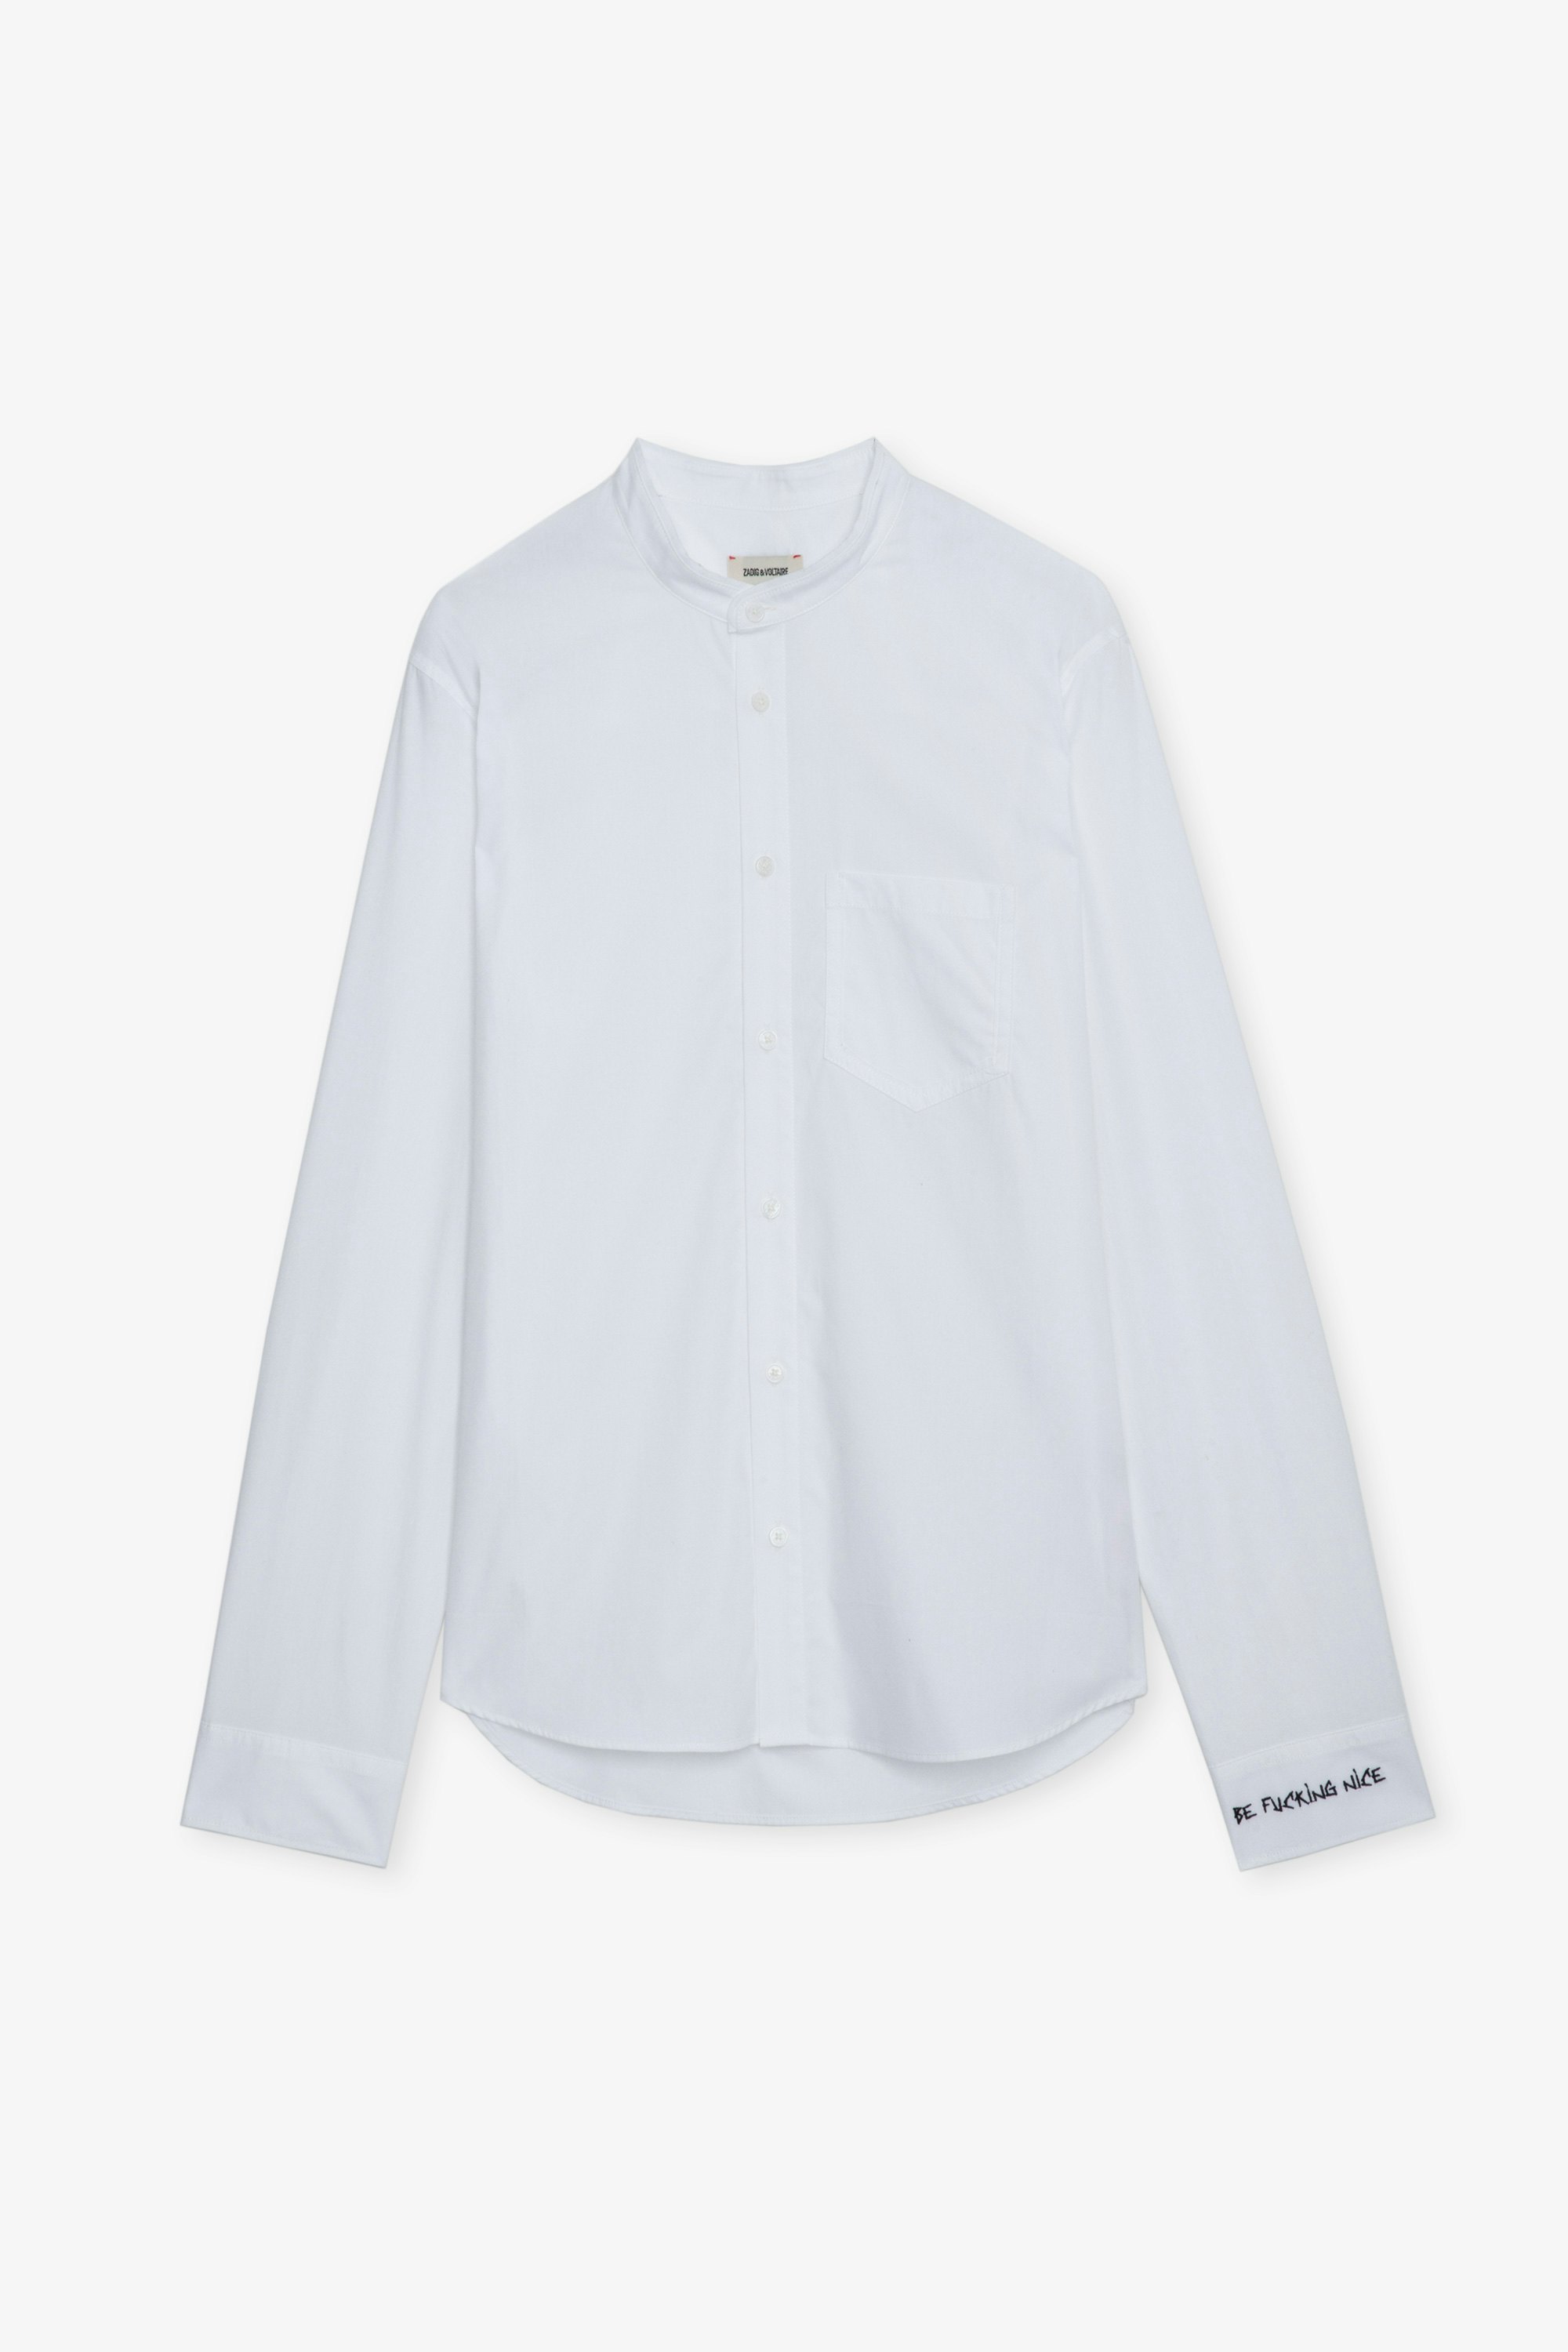 Sydney Shirt - Cotton poplin shirt with band collar featuring raw edge finishes and embroidery on the left cuff.